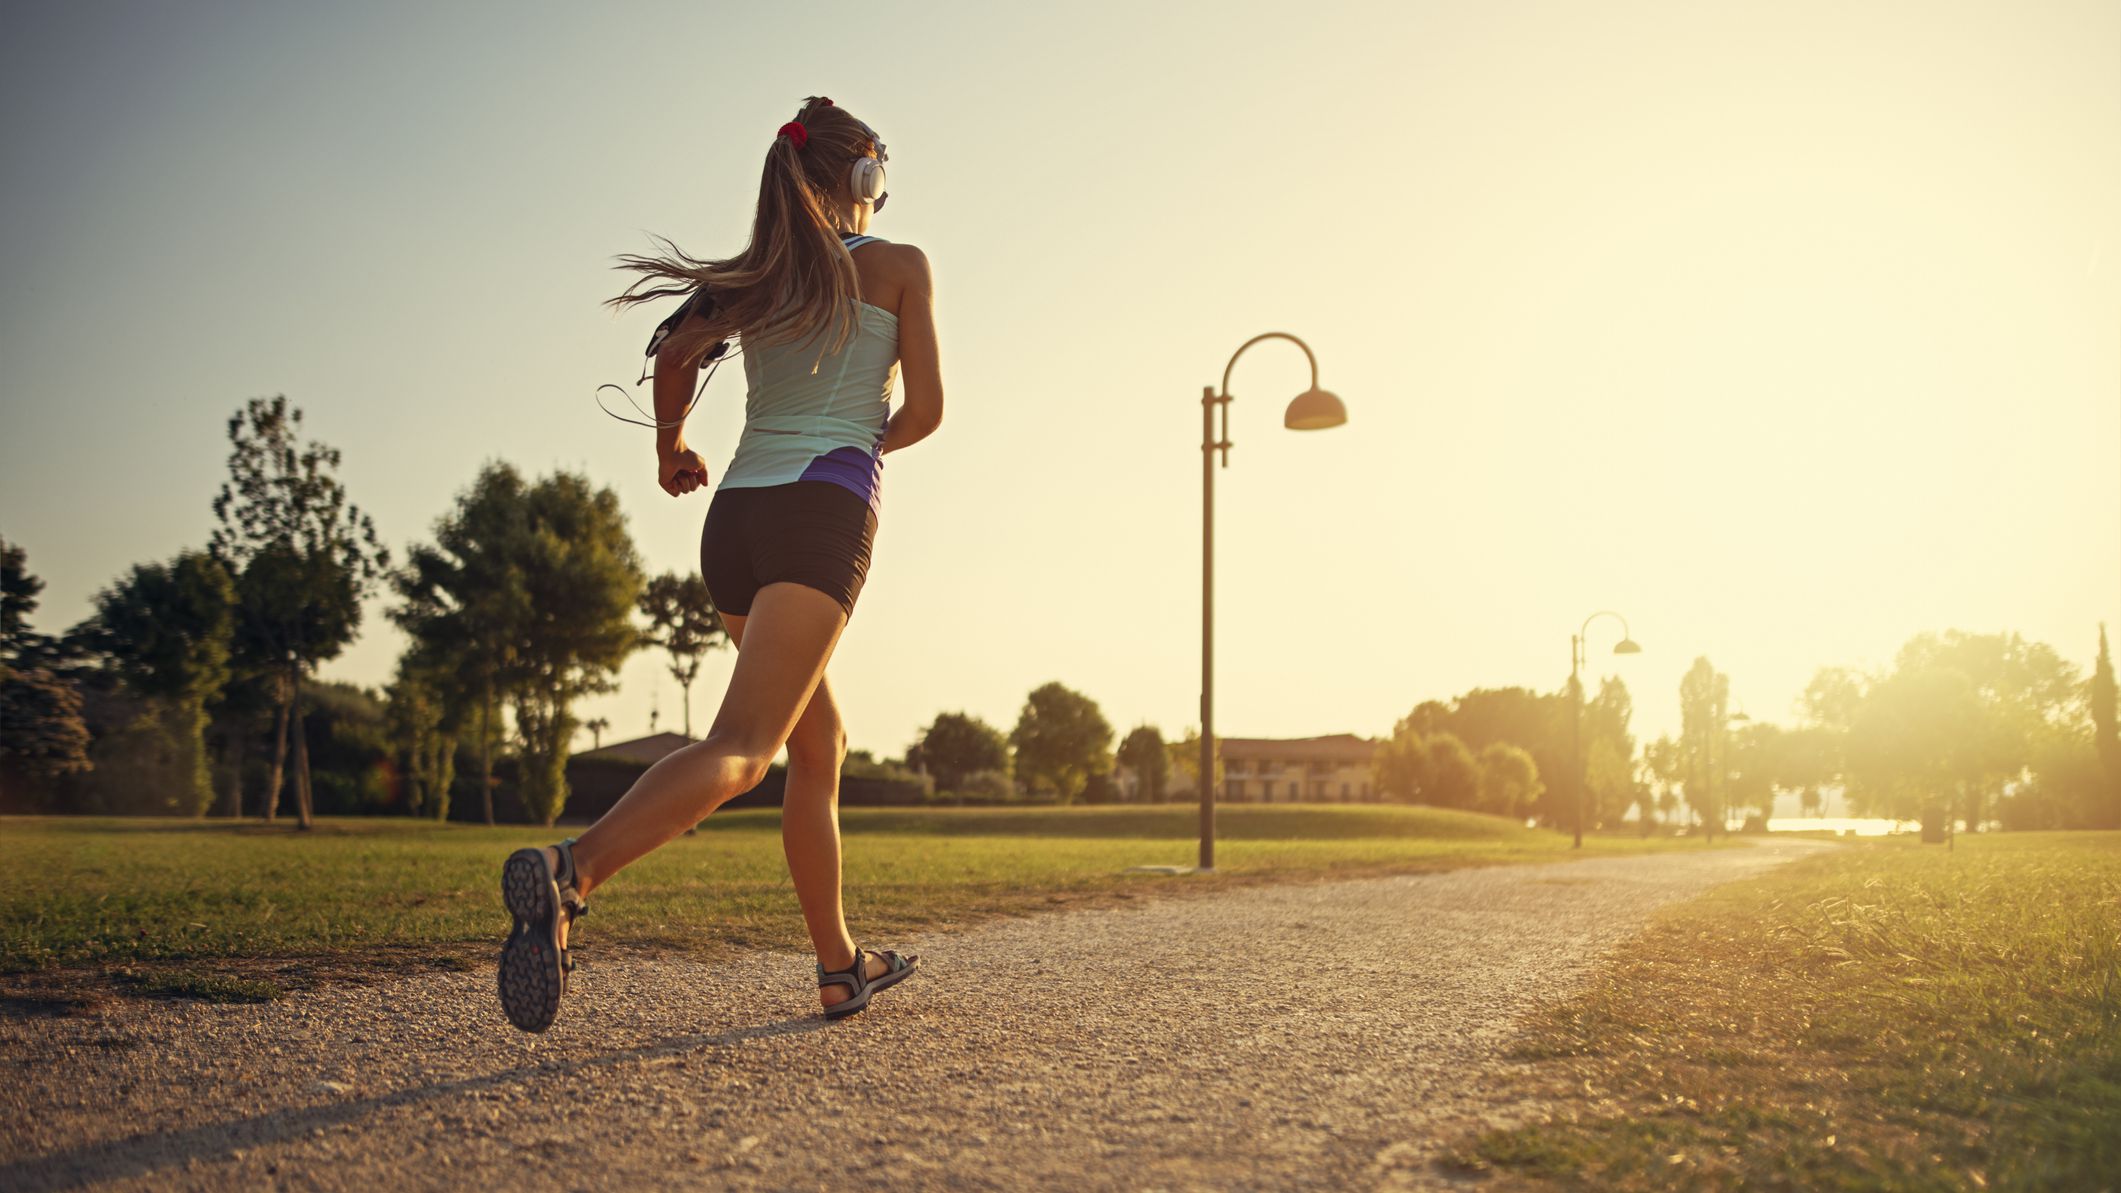 The Surprising Health Benefits of Jogging